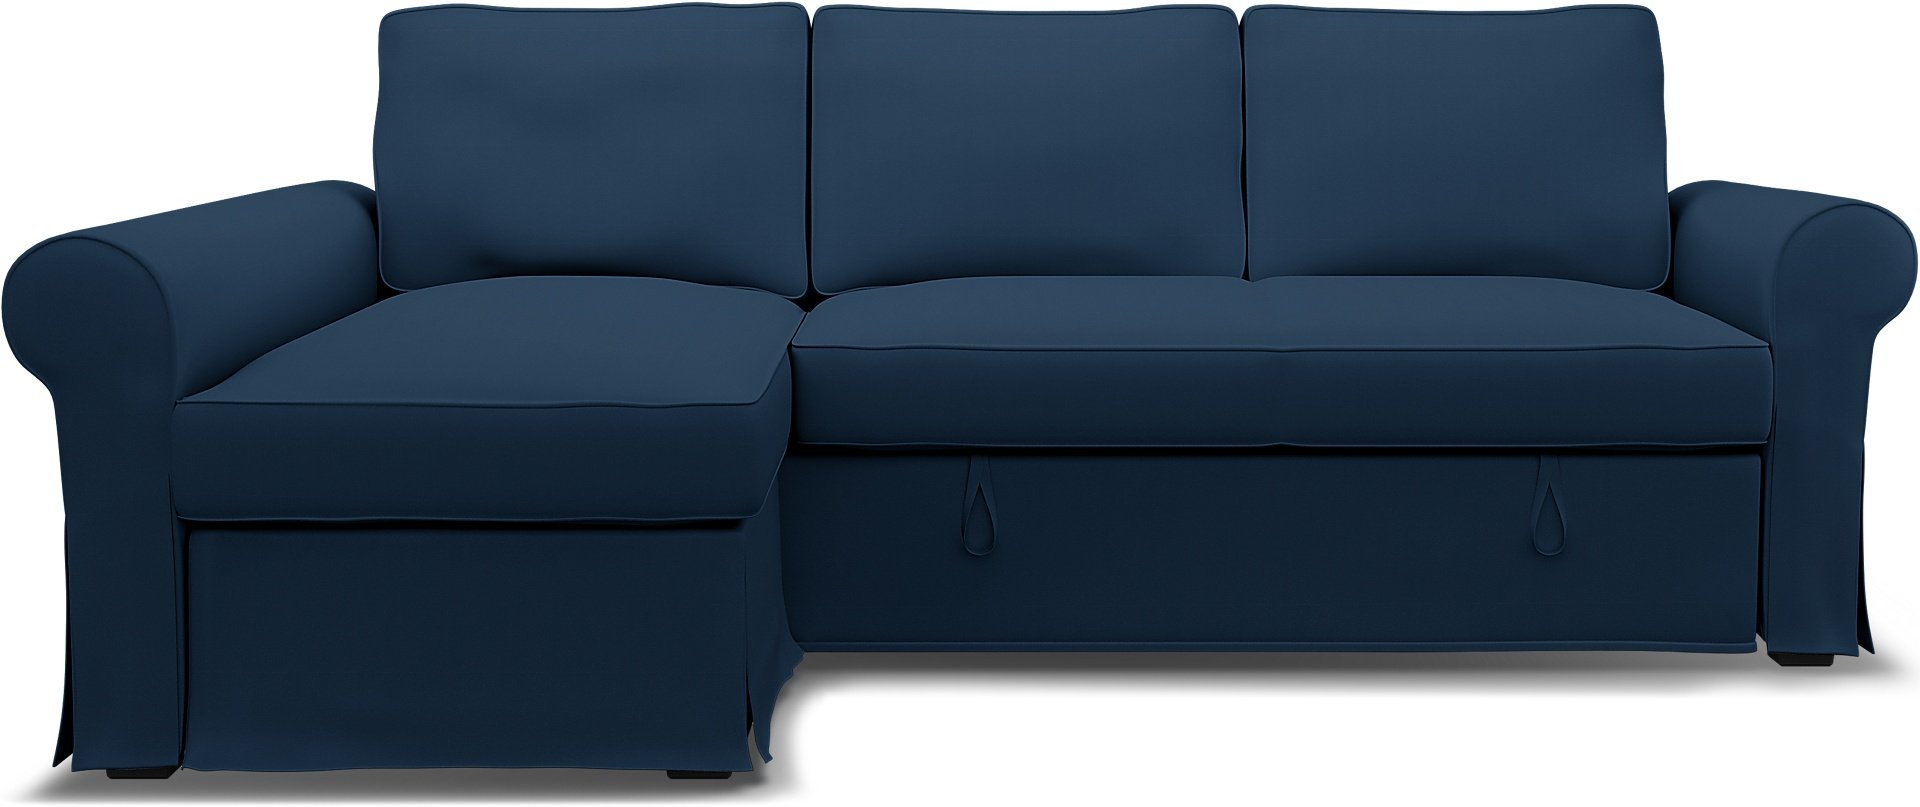 IKEA - Backabro Sofabed with Chaise Cover, Deep Navy Blue, Cotton - Bemz